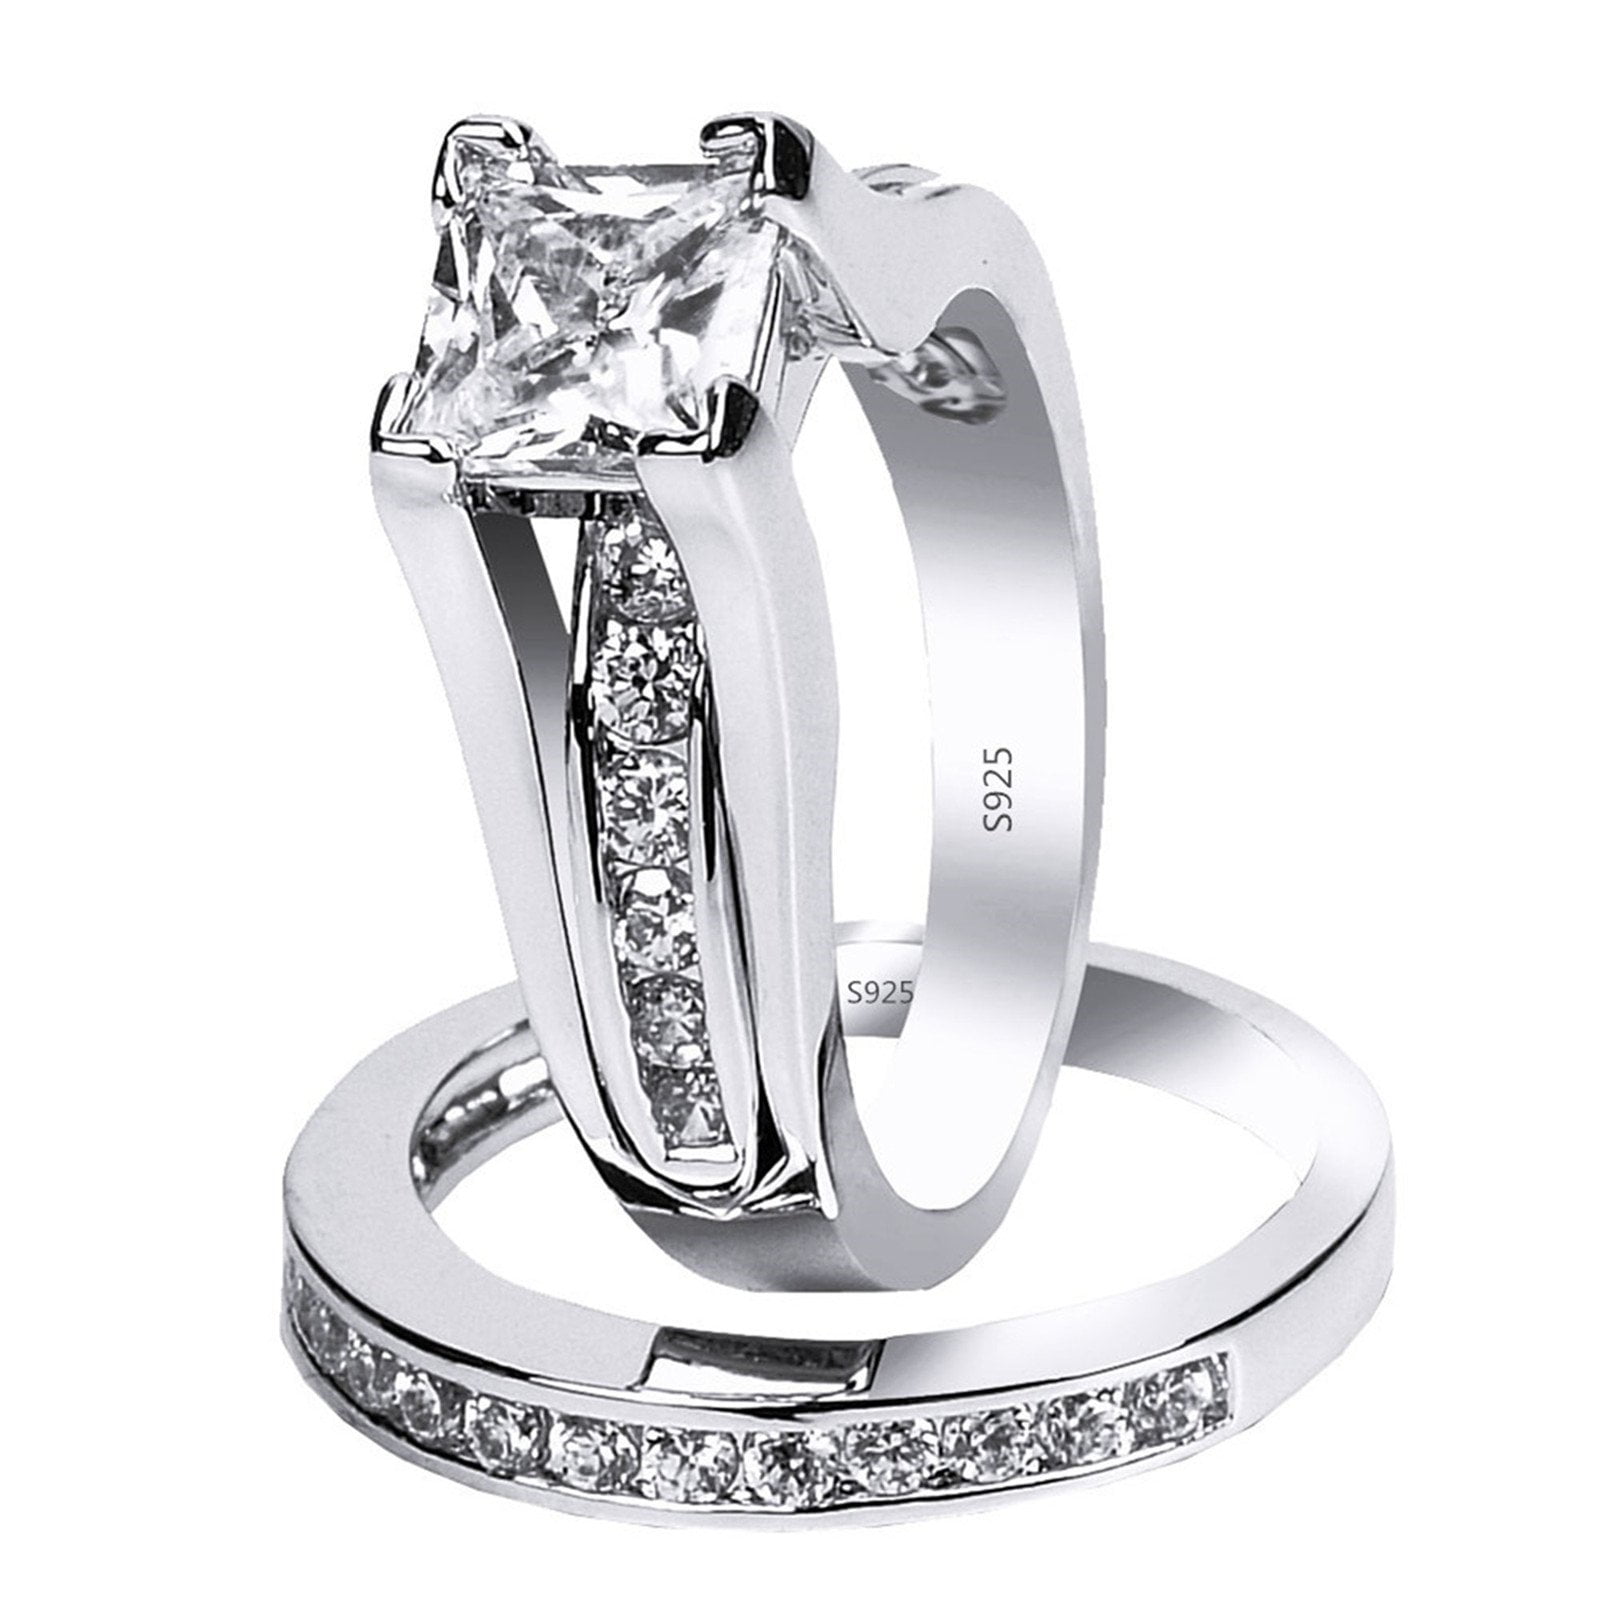 2.10 Ct Princess Cut AAA CZ Stainless Steel Wedding Ring Set Women's Size 5-10 